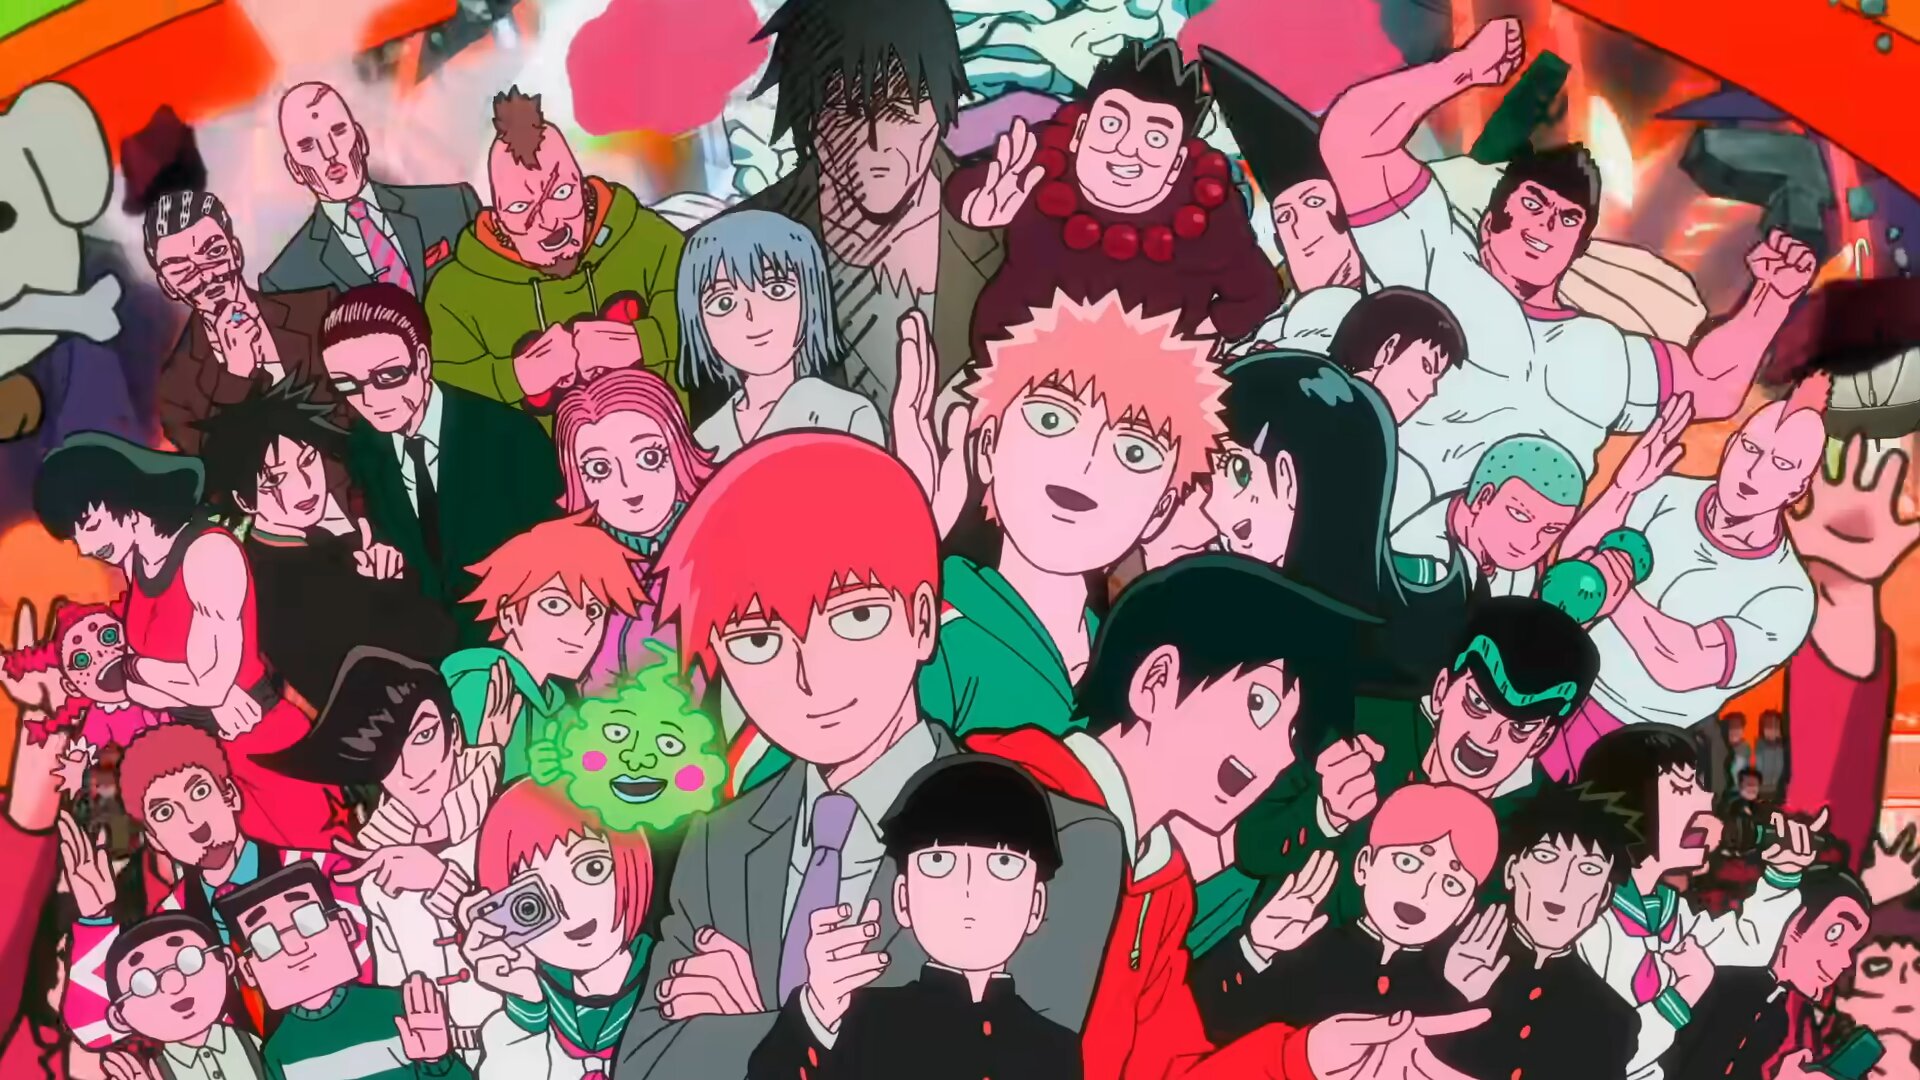 Mob Psycho 100 Season 3 Ending Explained: 'The Lies That Bind' Full Review